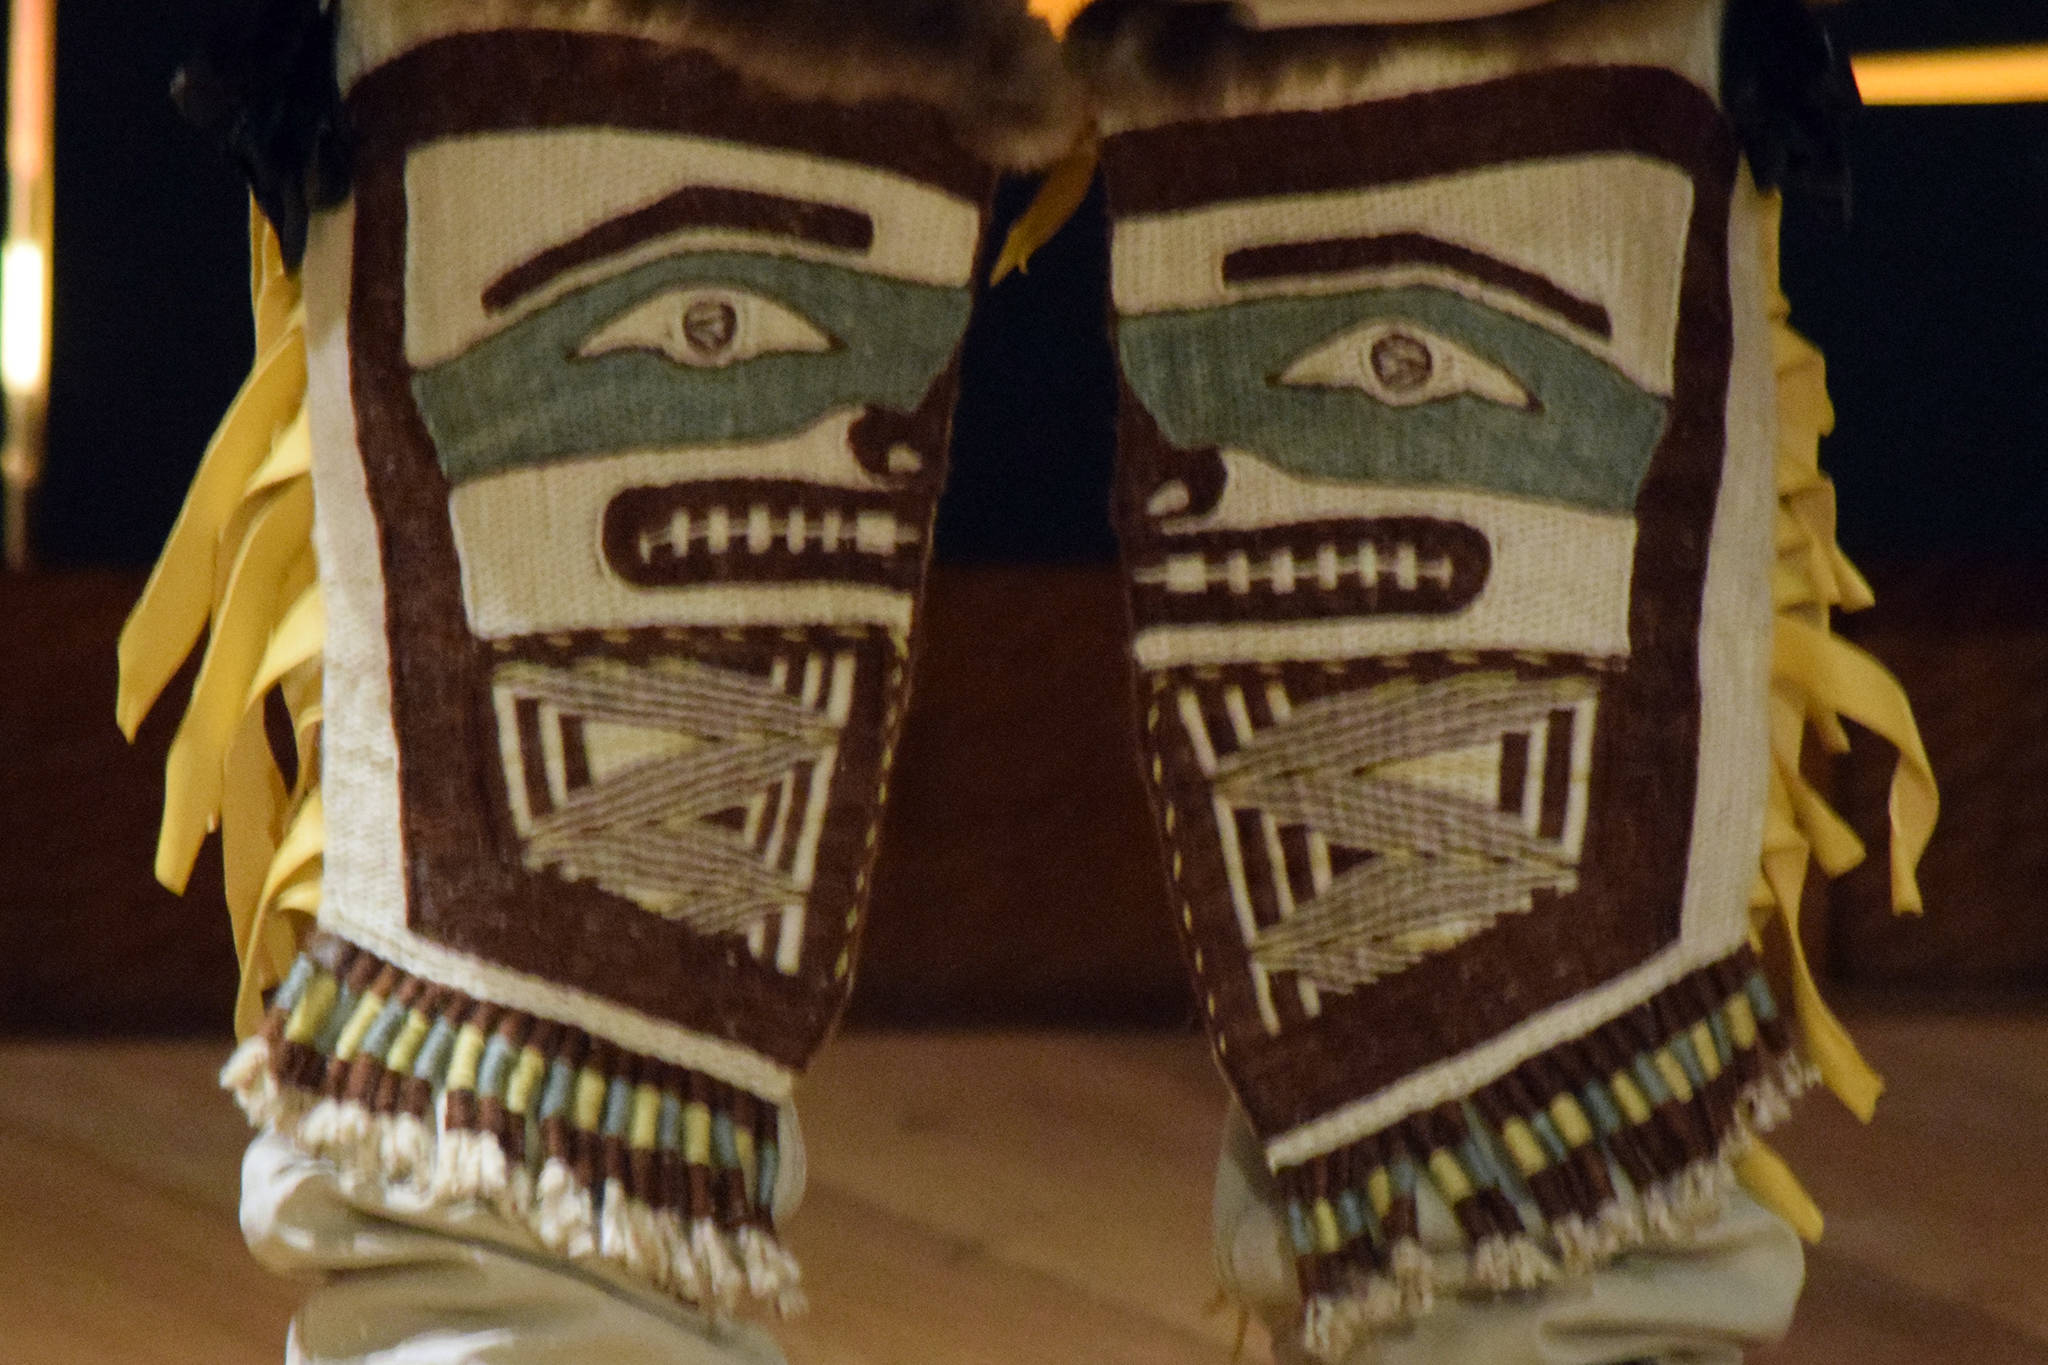 Dance it out: Tlingit weavers create unique leggings made of cedar and mountain goat wool